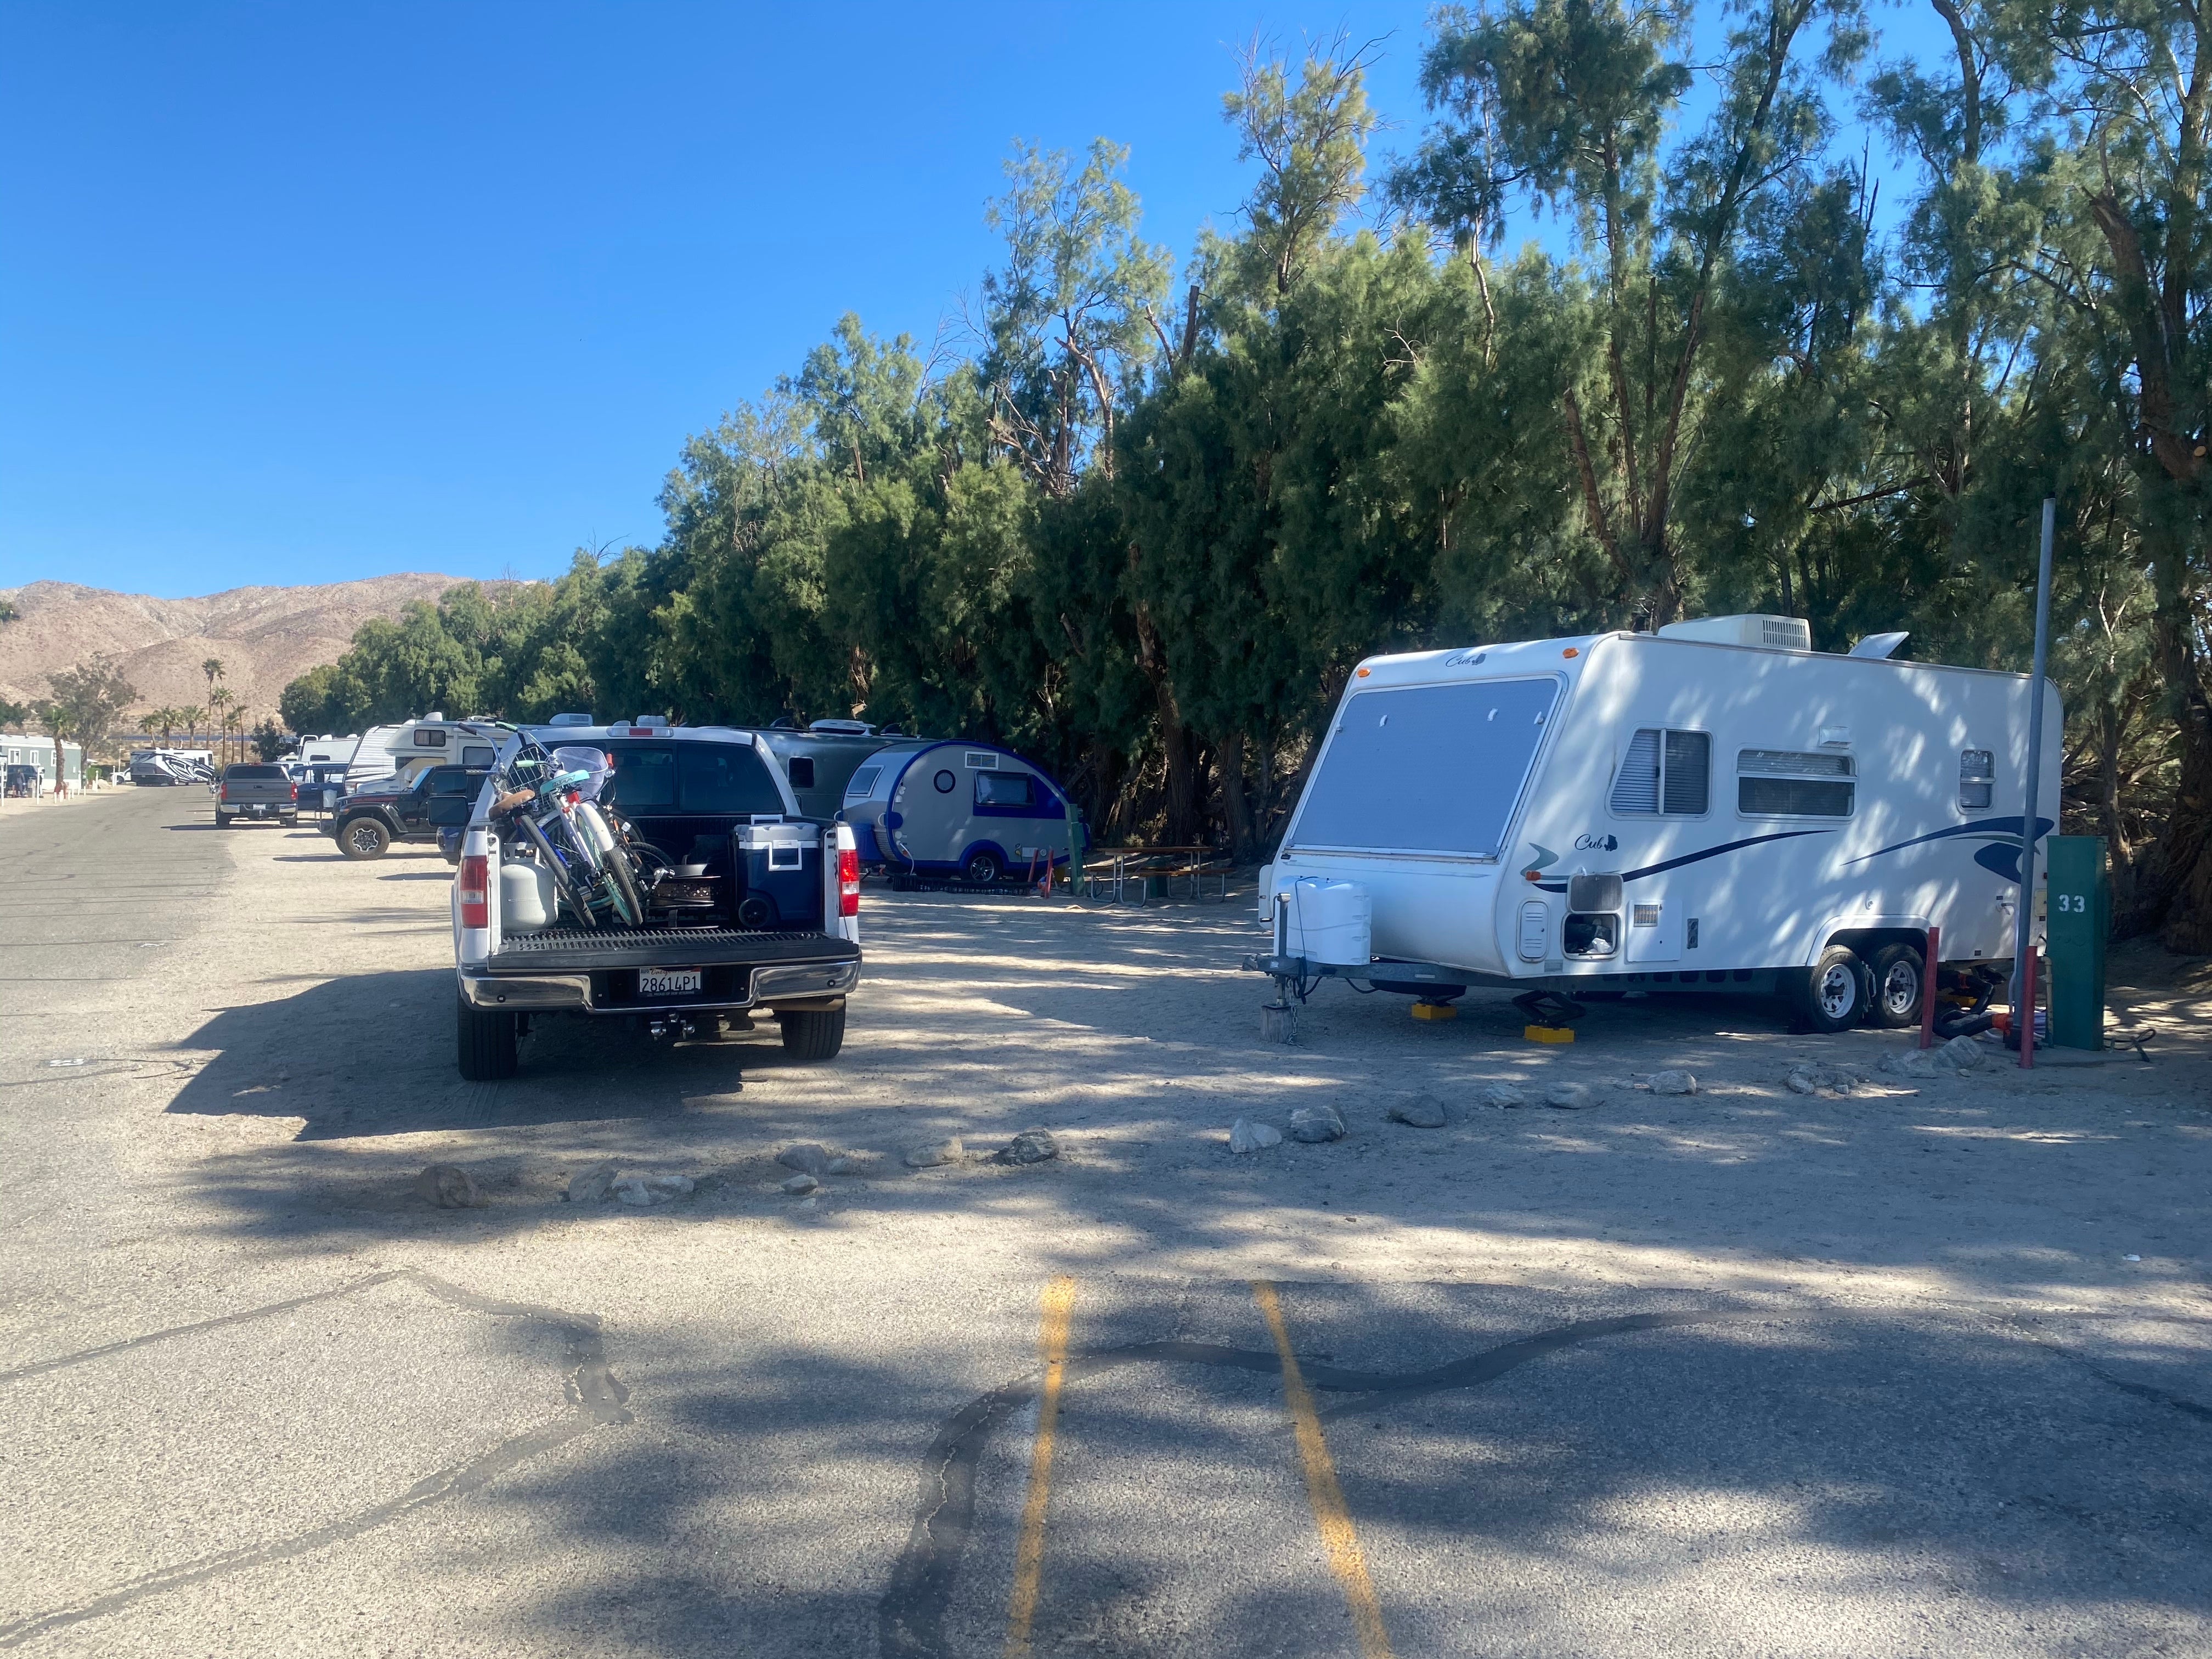 Camper submitted image from Palm Springs-Joshua Tree KOA - 3